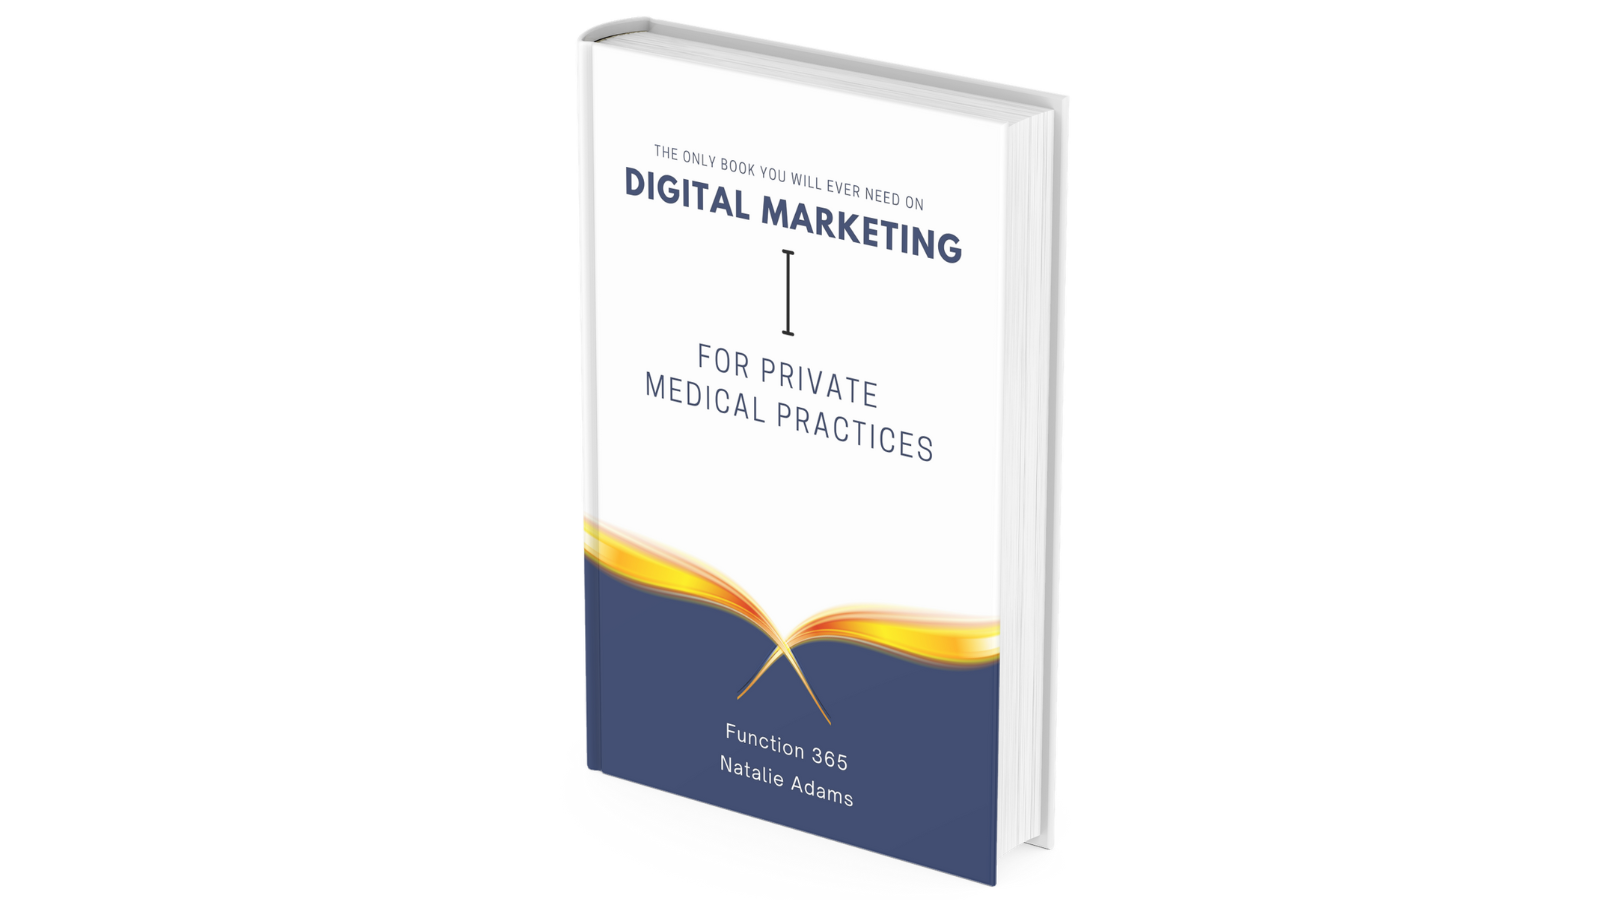 Digital Marketing for Private Medical Practices eBook